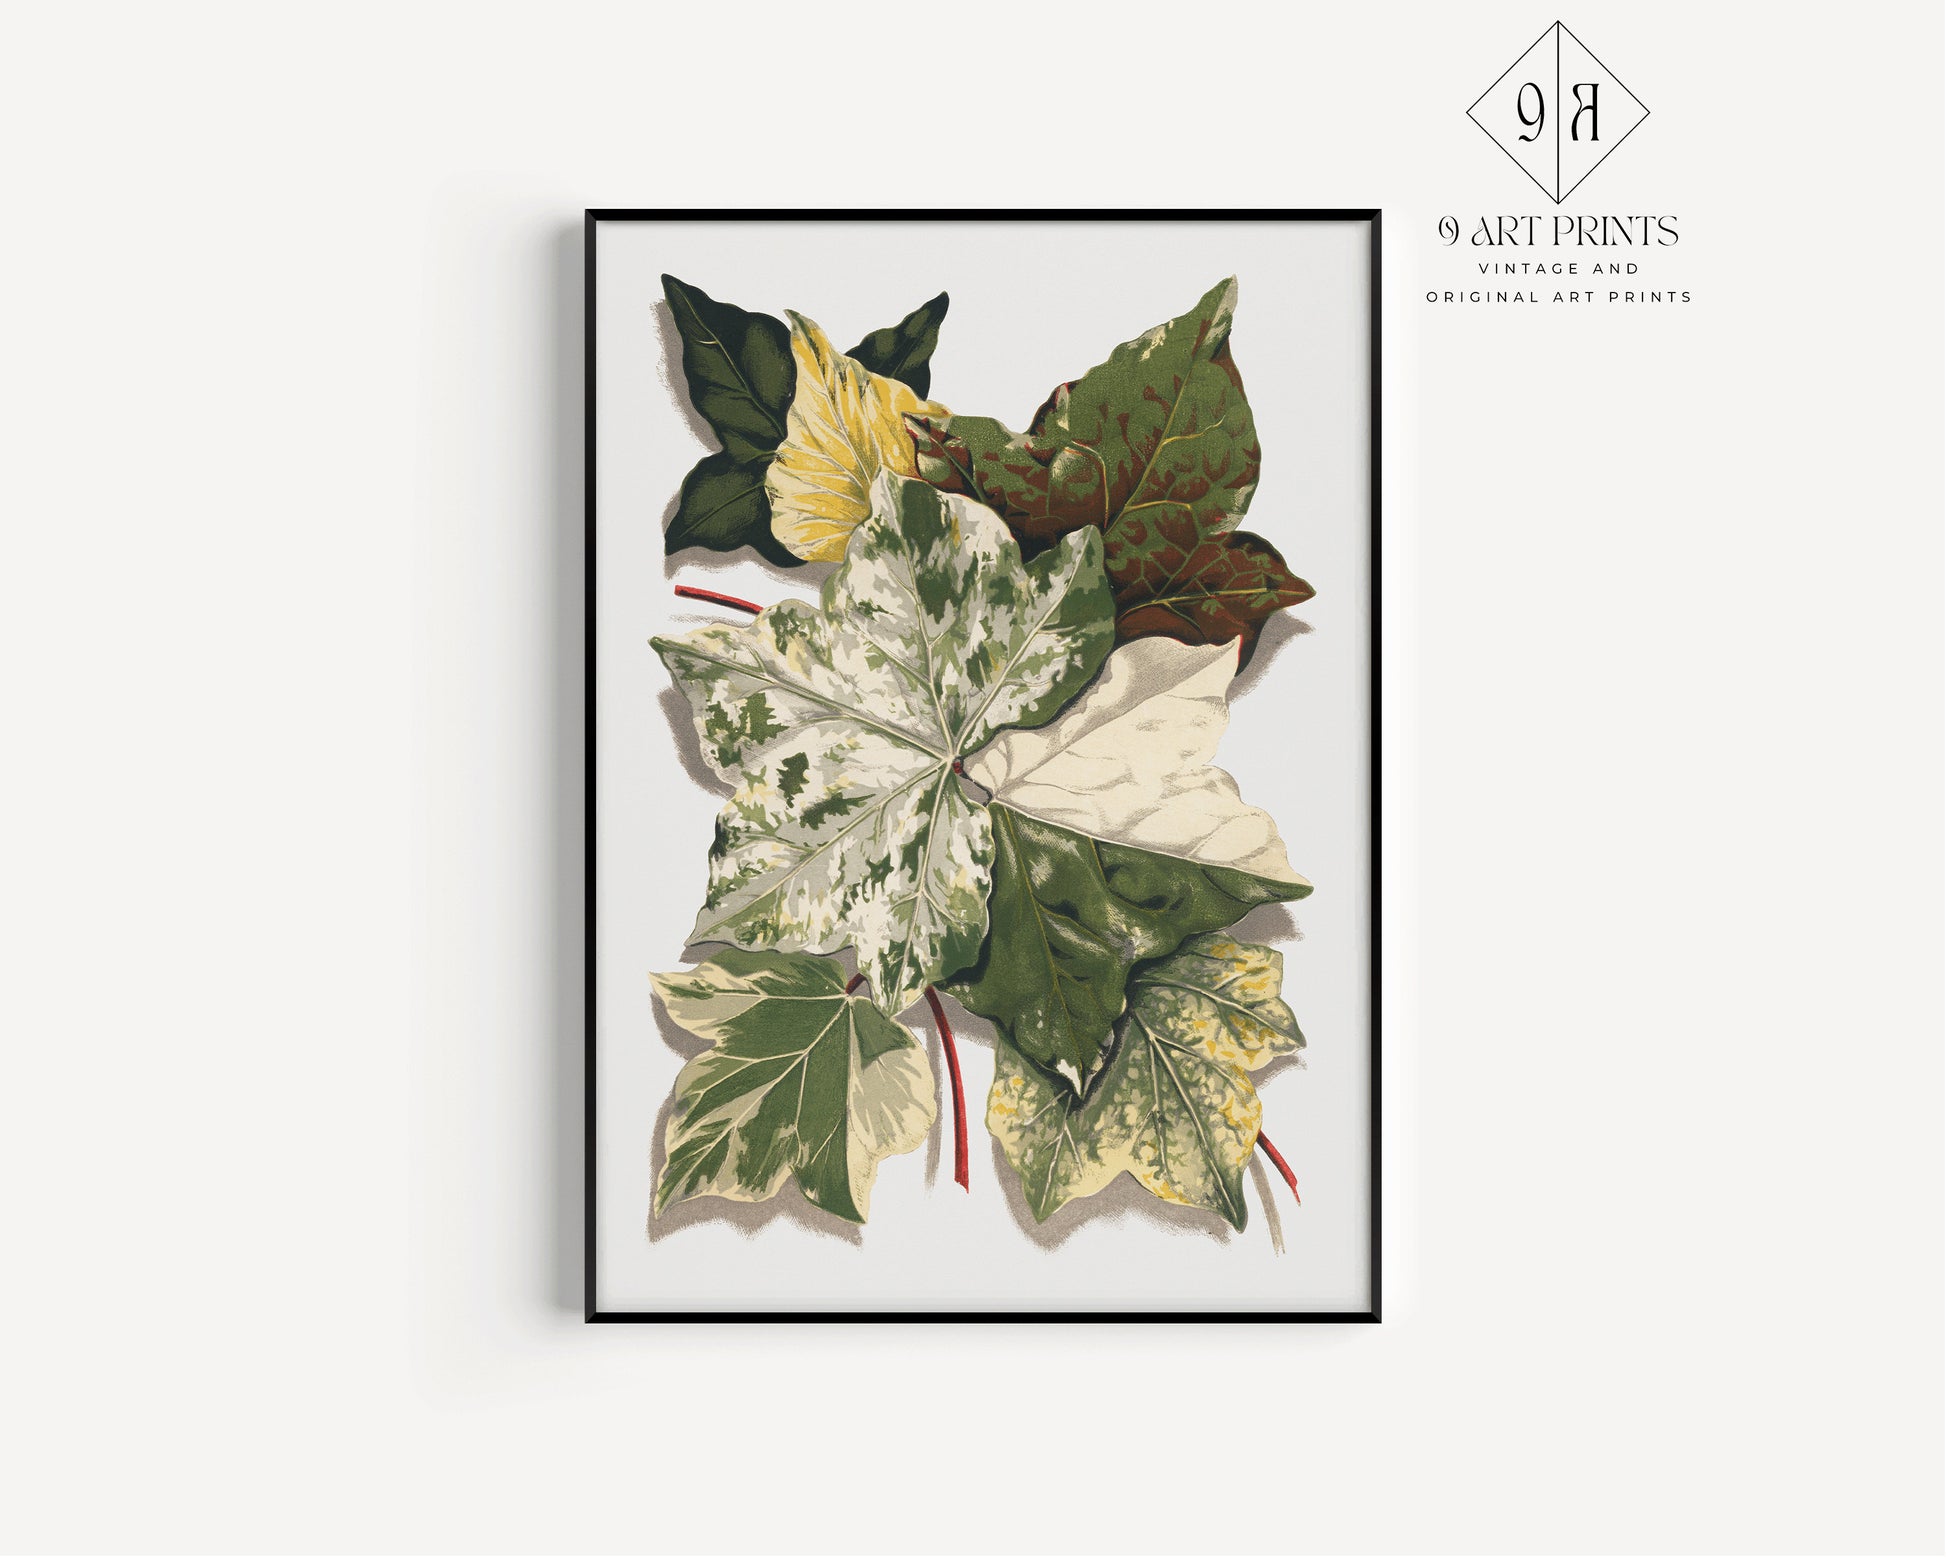 Set of 2 Leaf Prints Ivy Vintage Floral Art Ready to Hang Framed art for above bed sofa housewarming home office decor idea green white